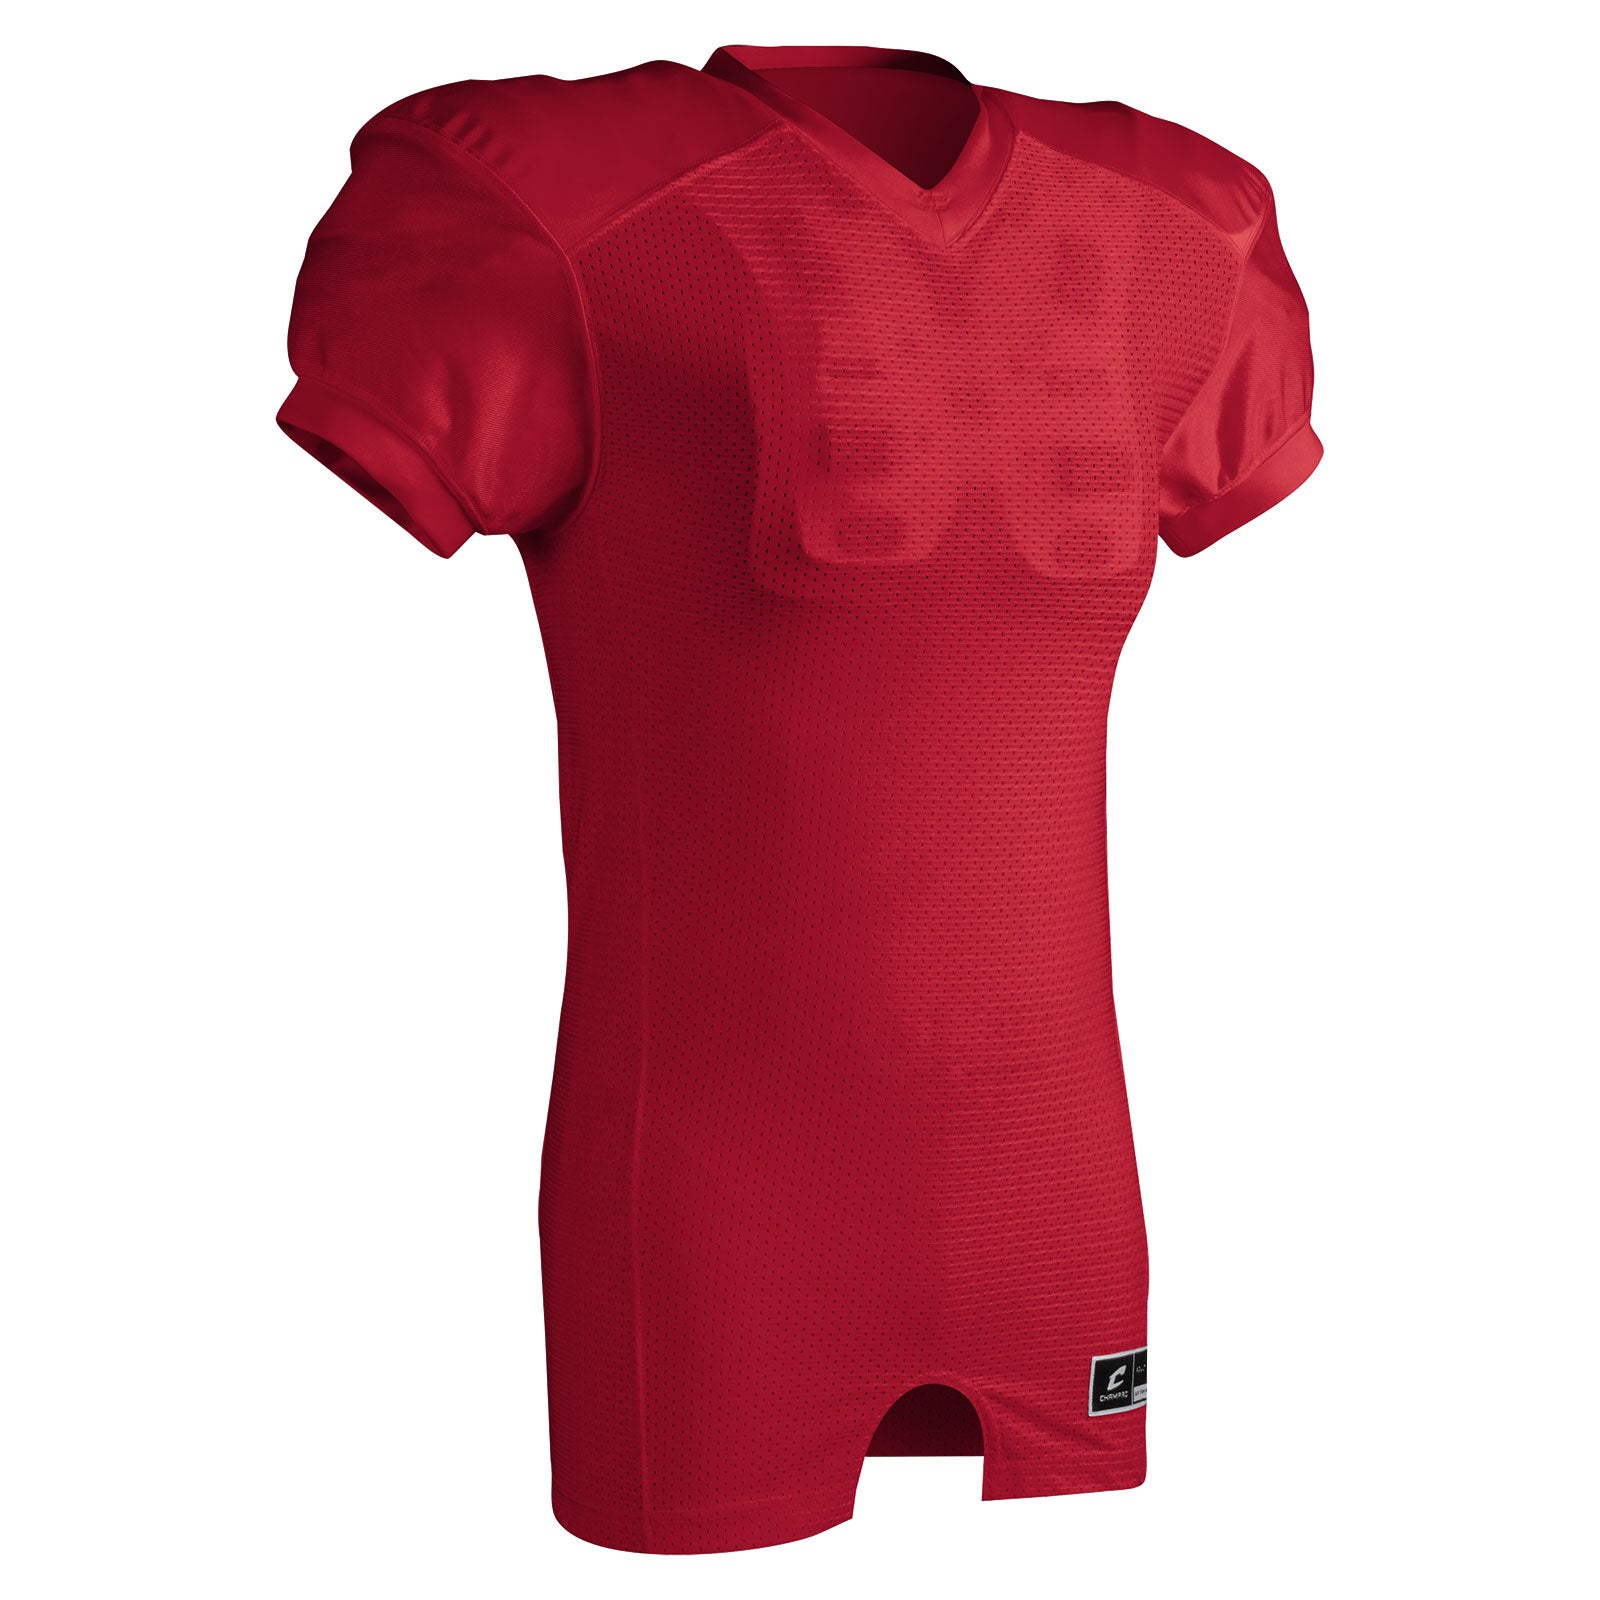 Pro-Fit Collegiate Fit Football Game Jersey SCARLET BODY